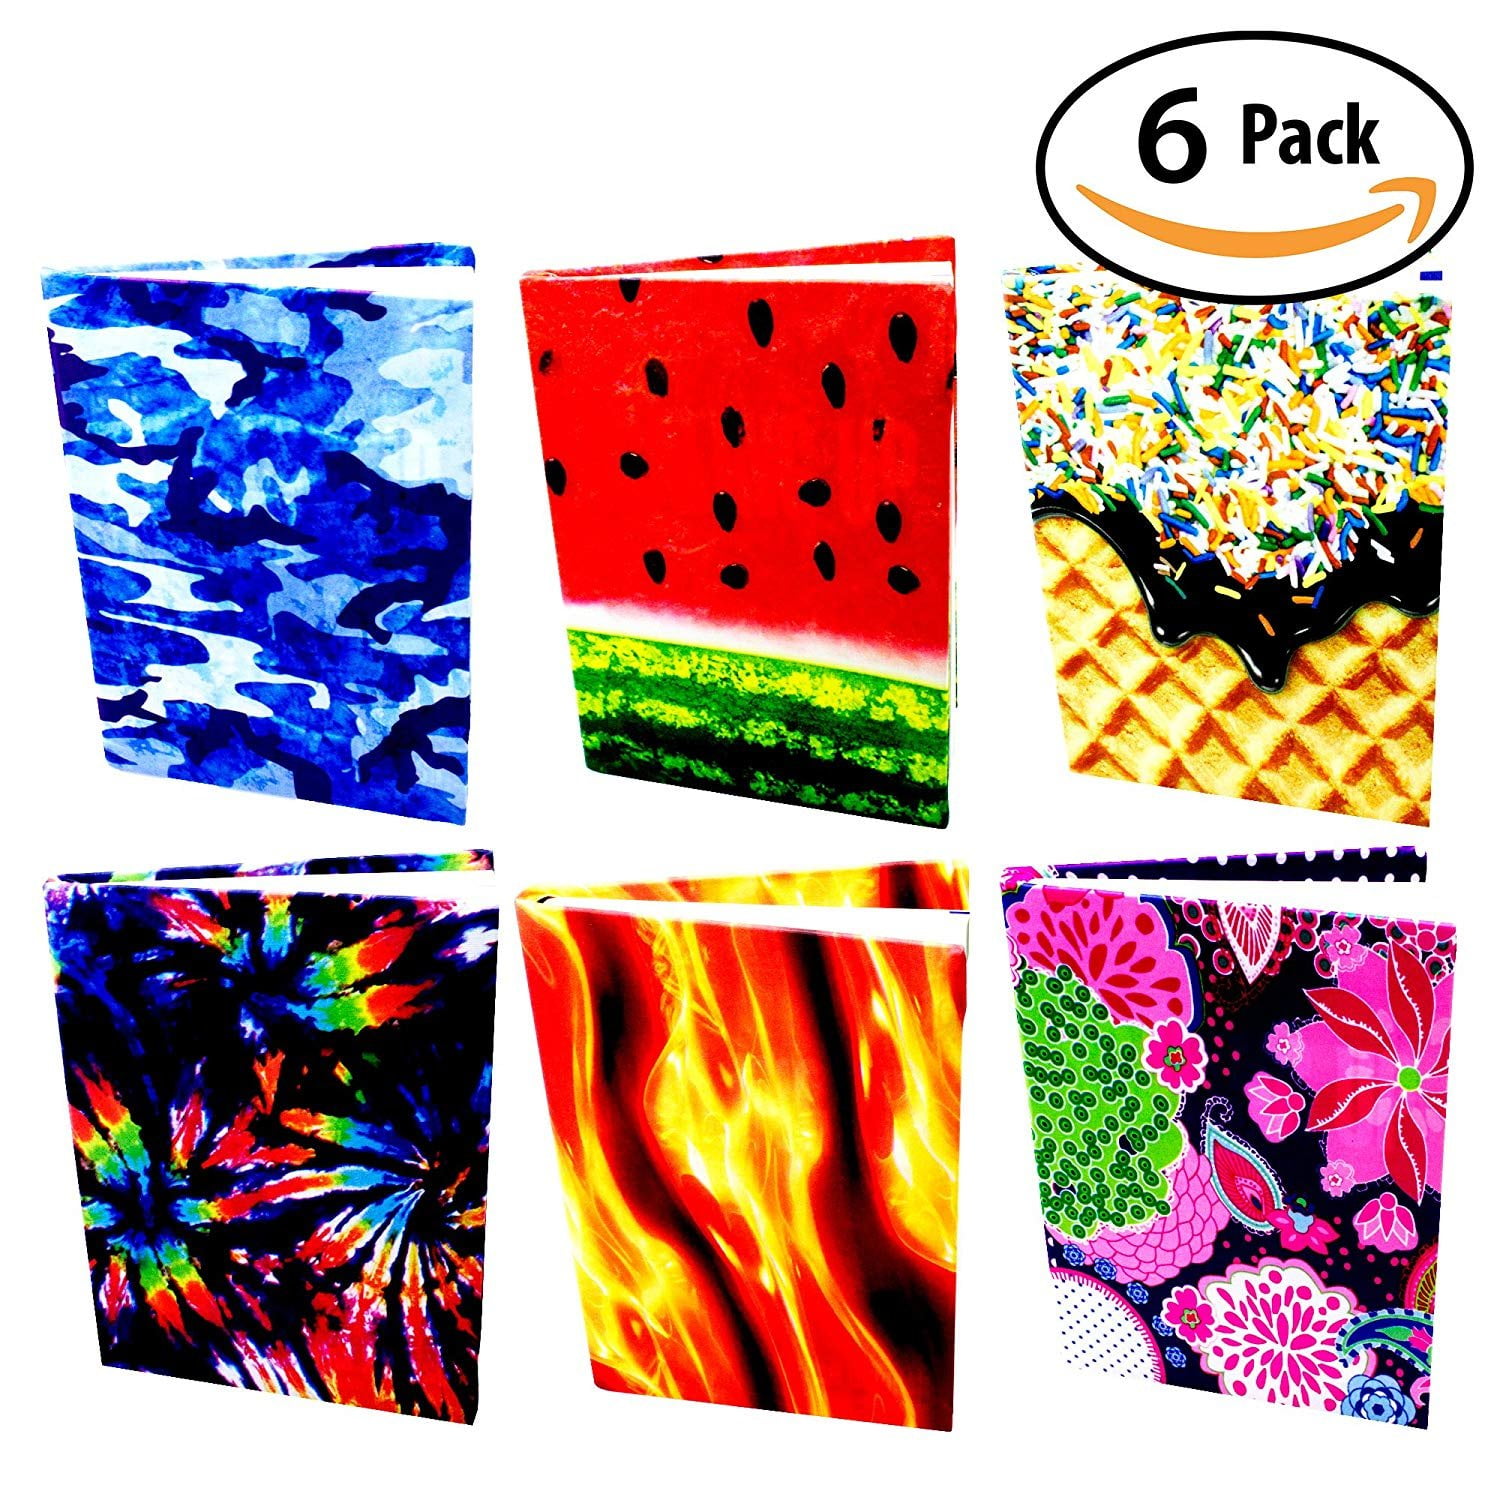 Standard Size Soft Book Covers for Textbooks 6 Stretchy 4 Solid and 2 Print 